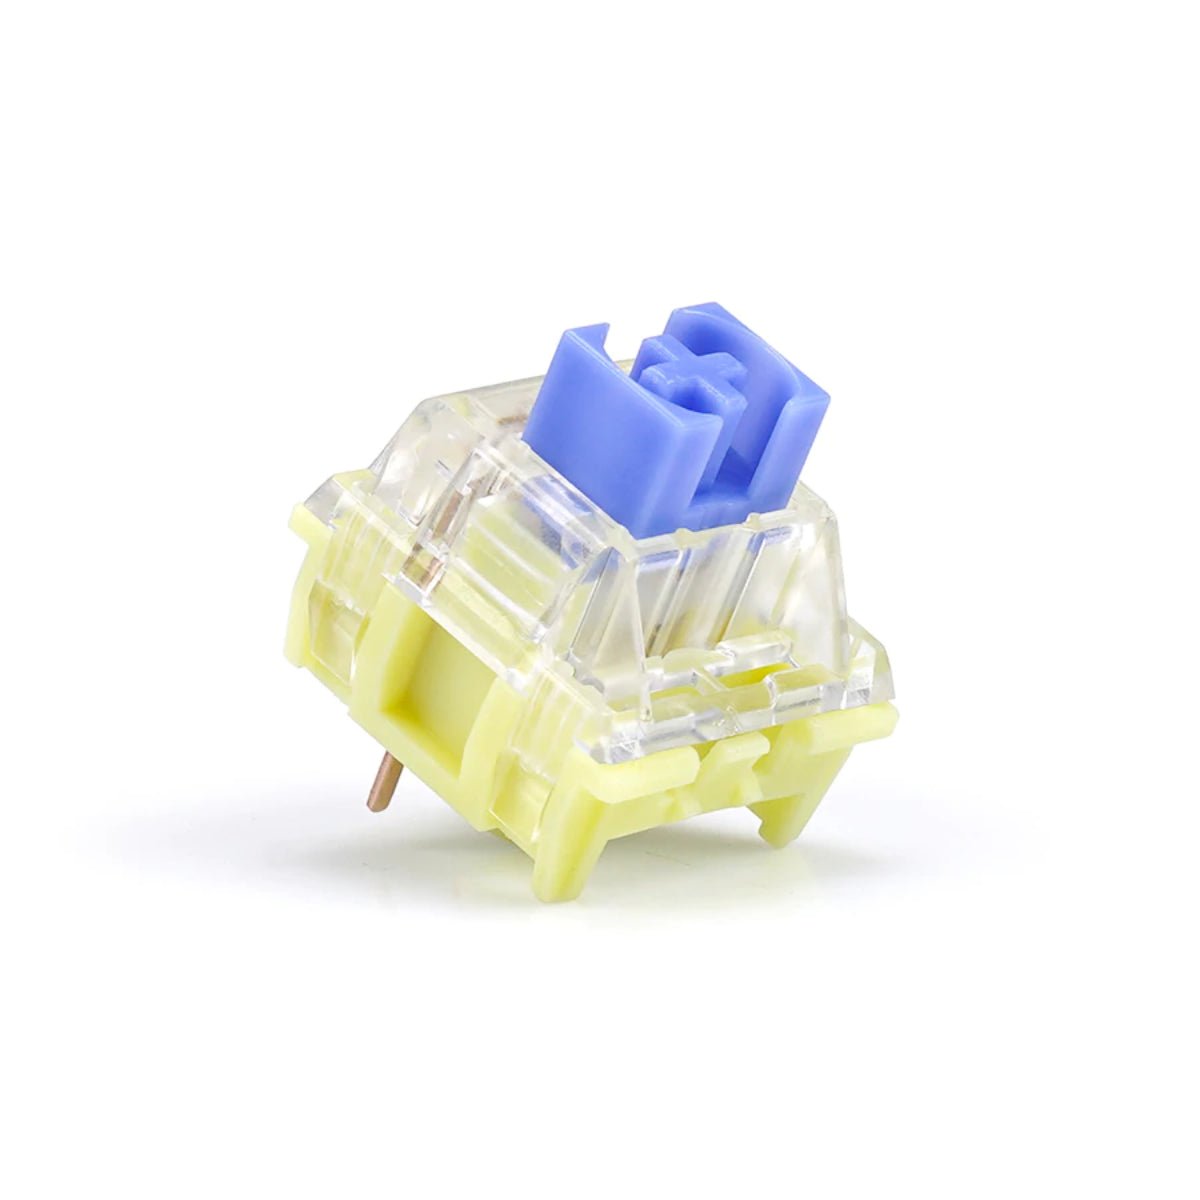 KBD Fans TTC Clicky Switches - Golden Blue - Store 974 | ستور ٩٧٤